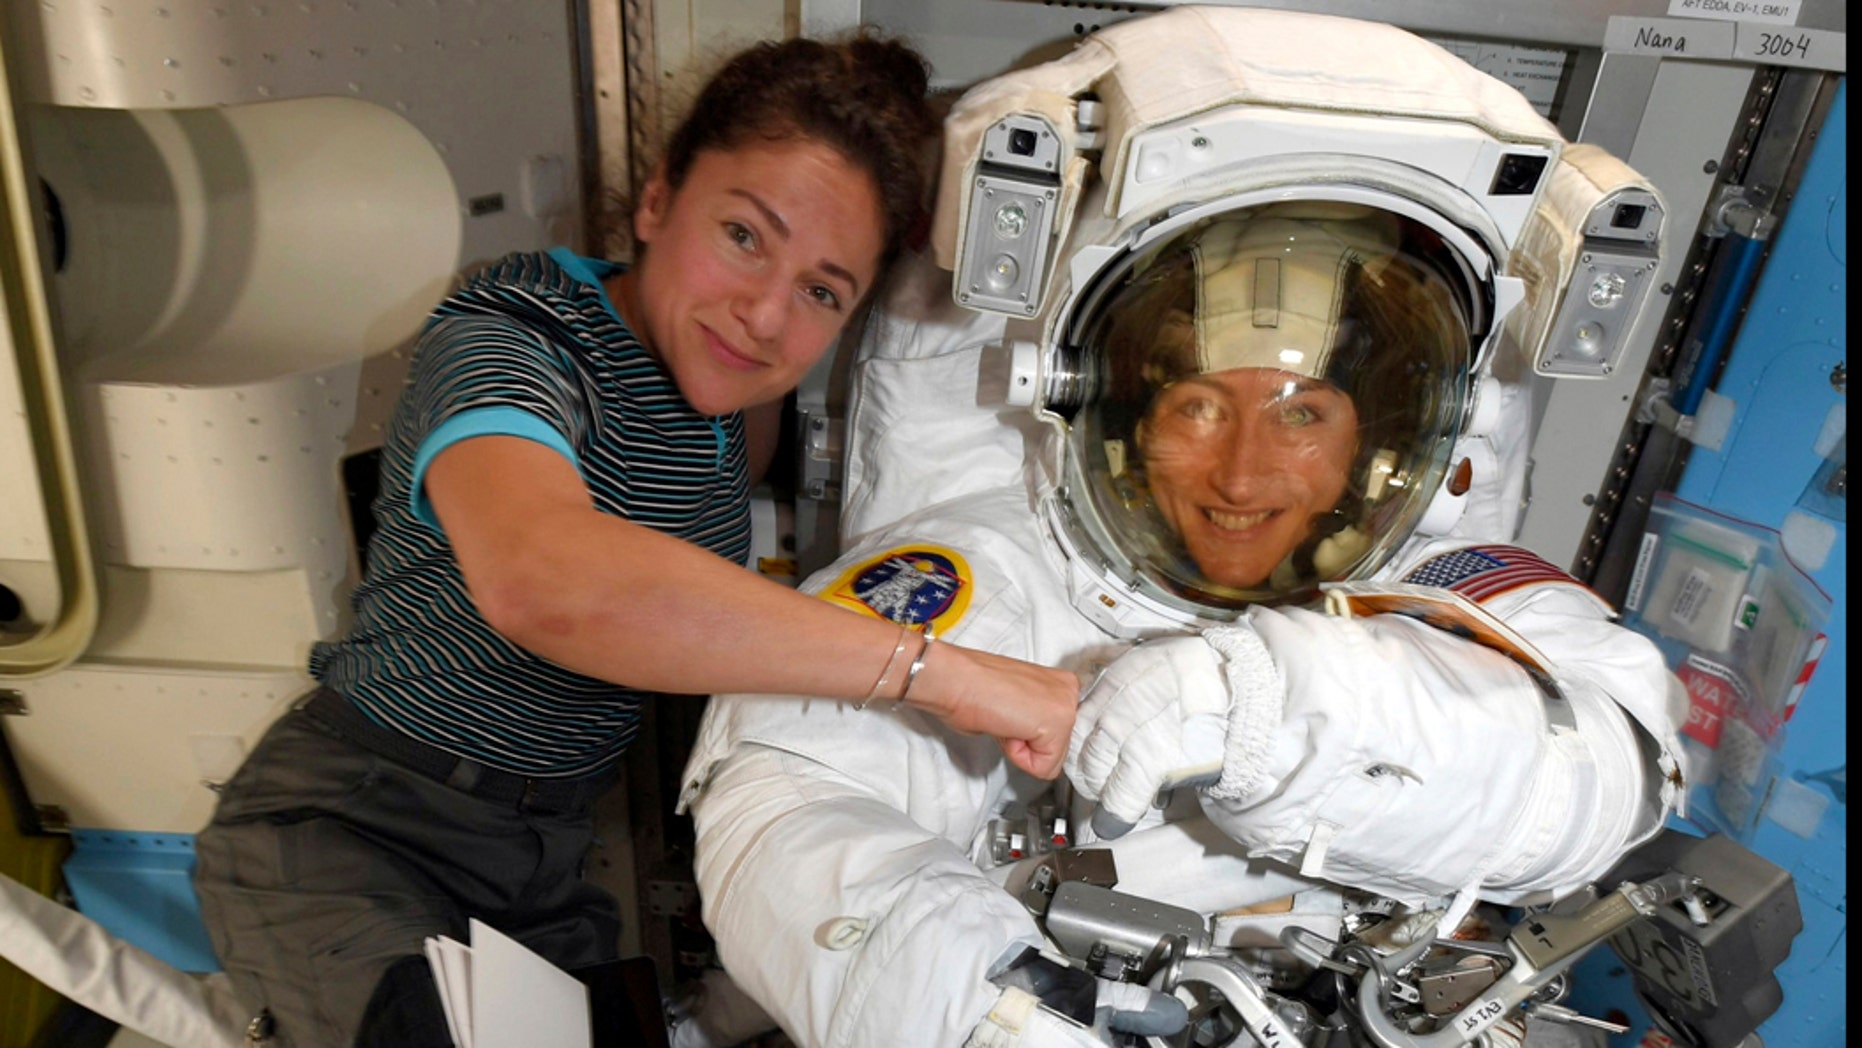 FILE - In this image released Friday, Oct. 4, 2019, by NASA, astronauts Christina Koch, right, and, Jessica Meir pose for a photo on the International Space Station. NASA has moved up the first all-female spacewalk to Thursday, Oct. 17, 2019, or Friday because of a power system failure at the International Space Station. (NASA via AP)